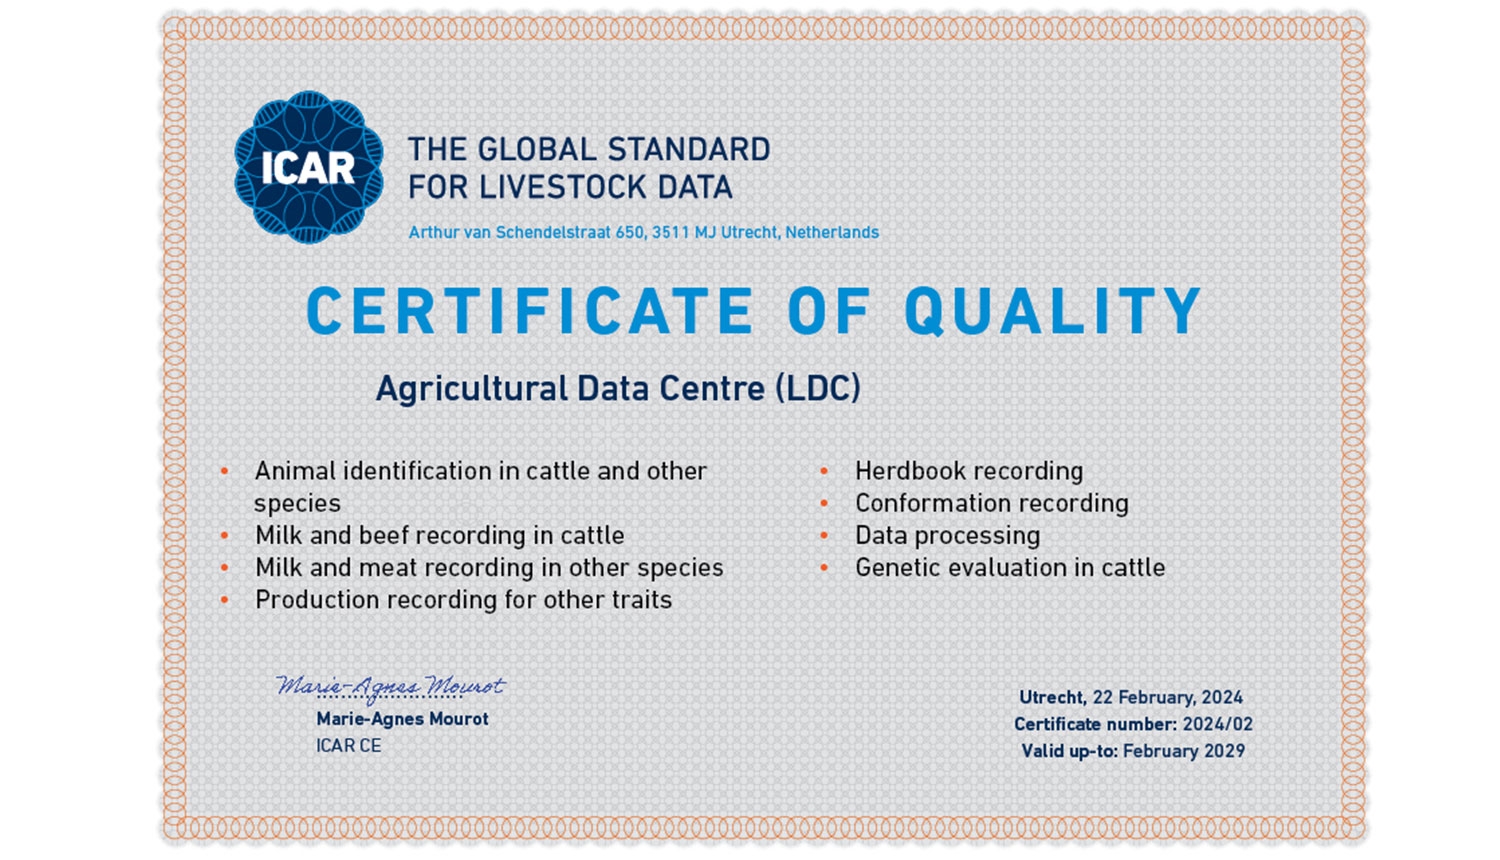 ICAR certificate of quality